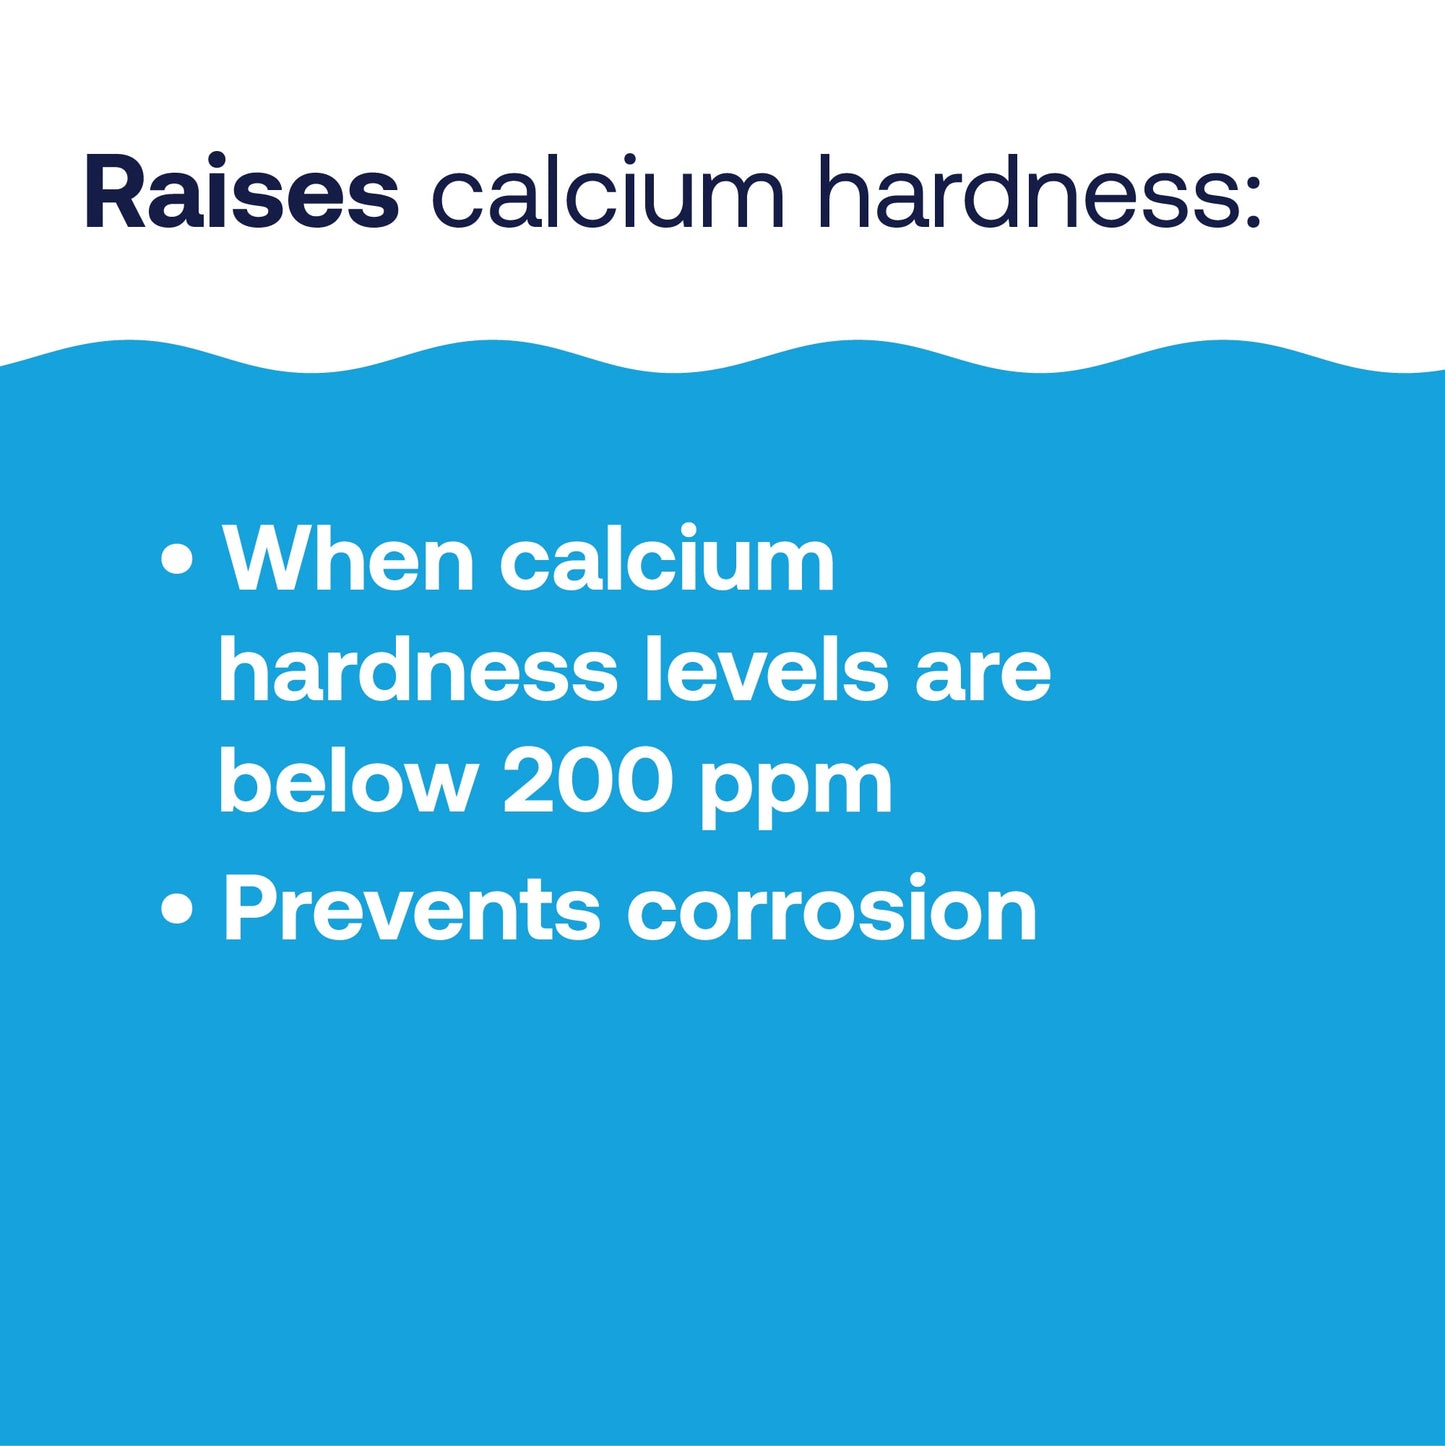 HTH™ Pool Care Calcium Up: Hardness Increaser for Pools